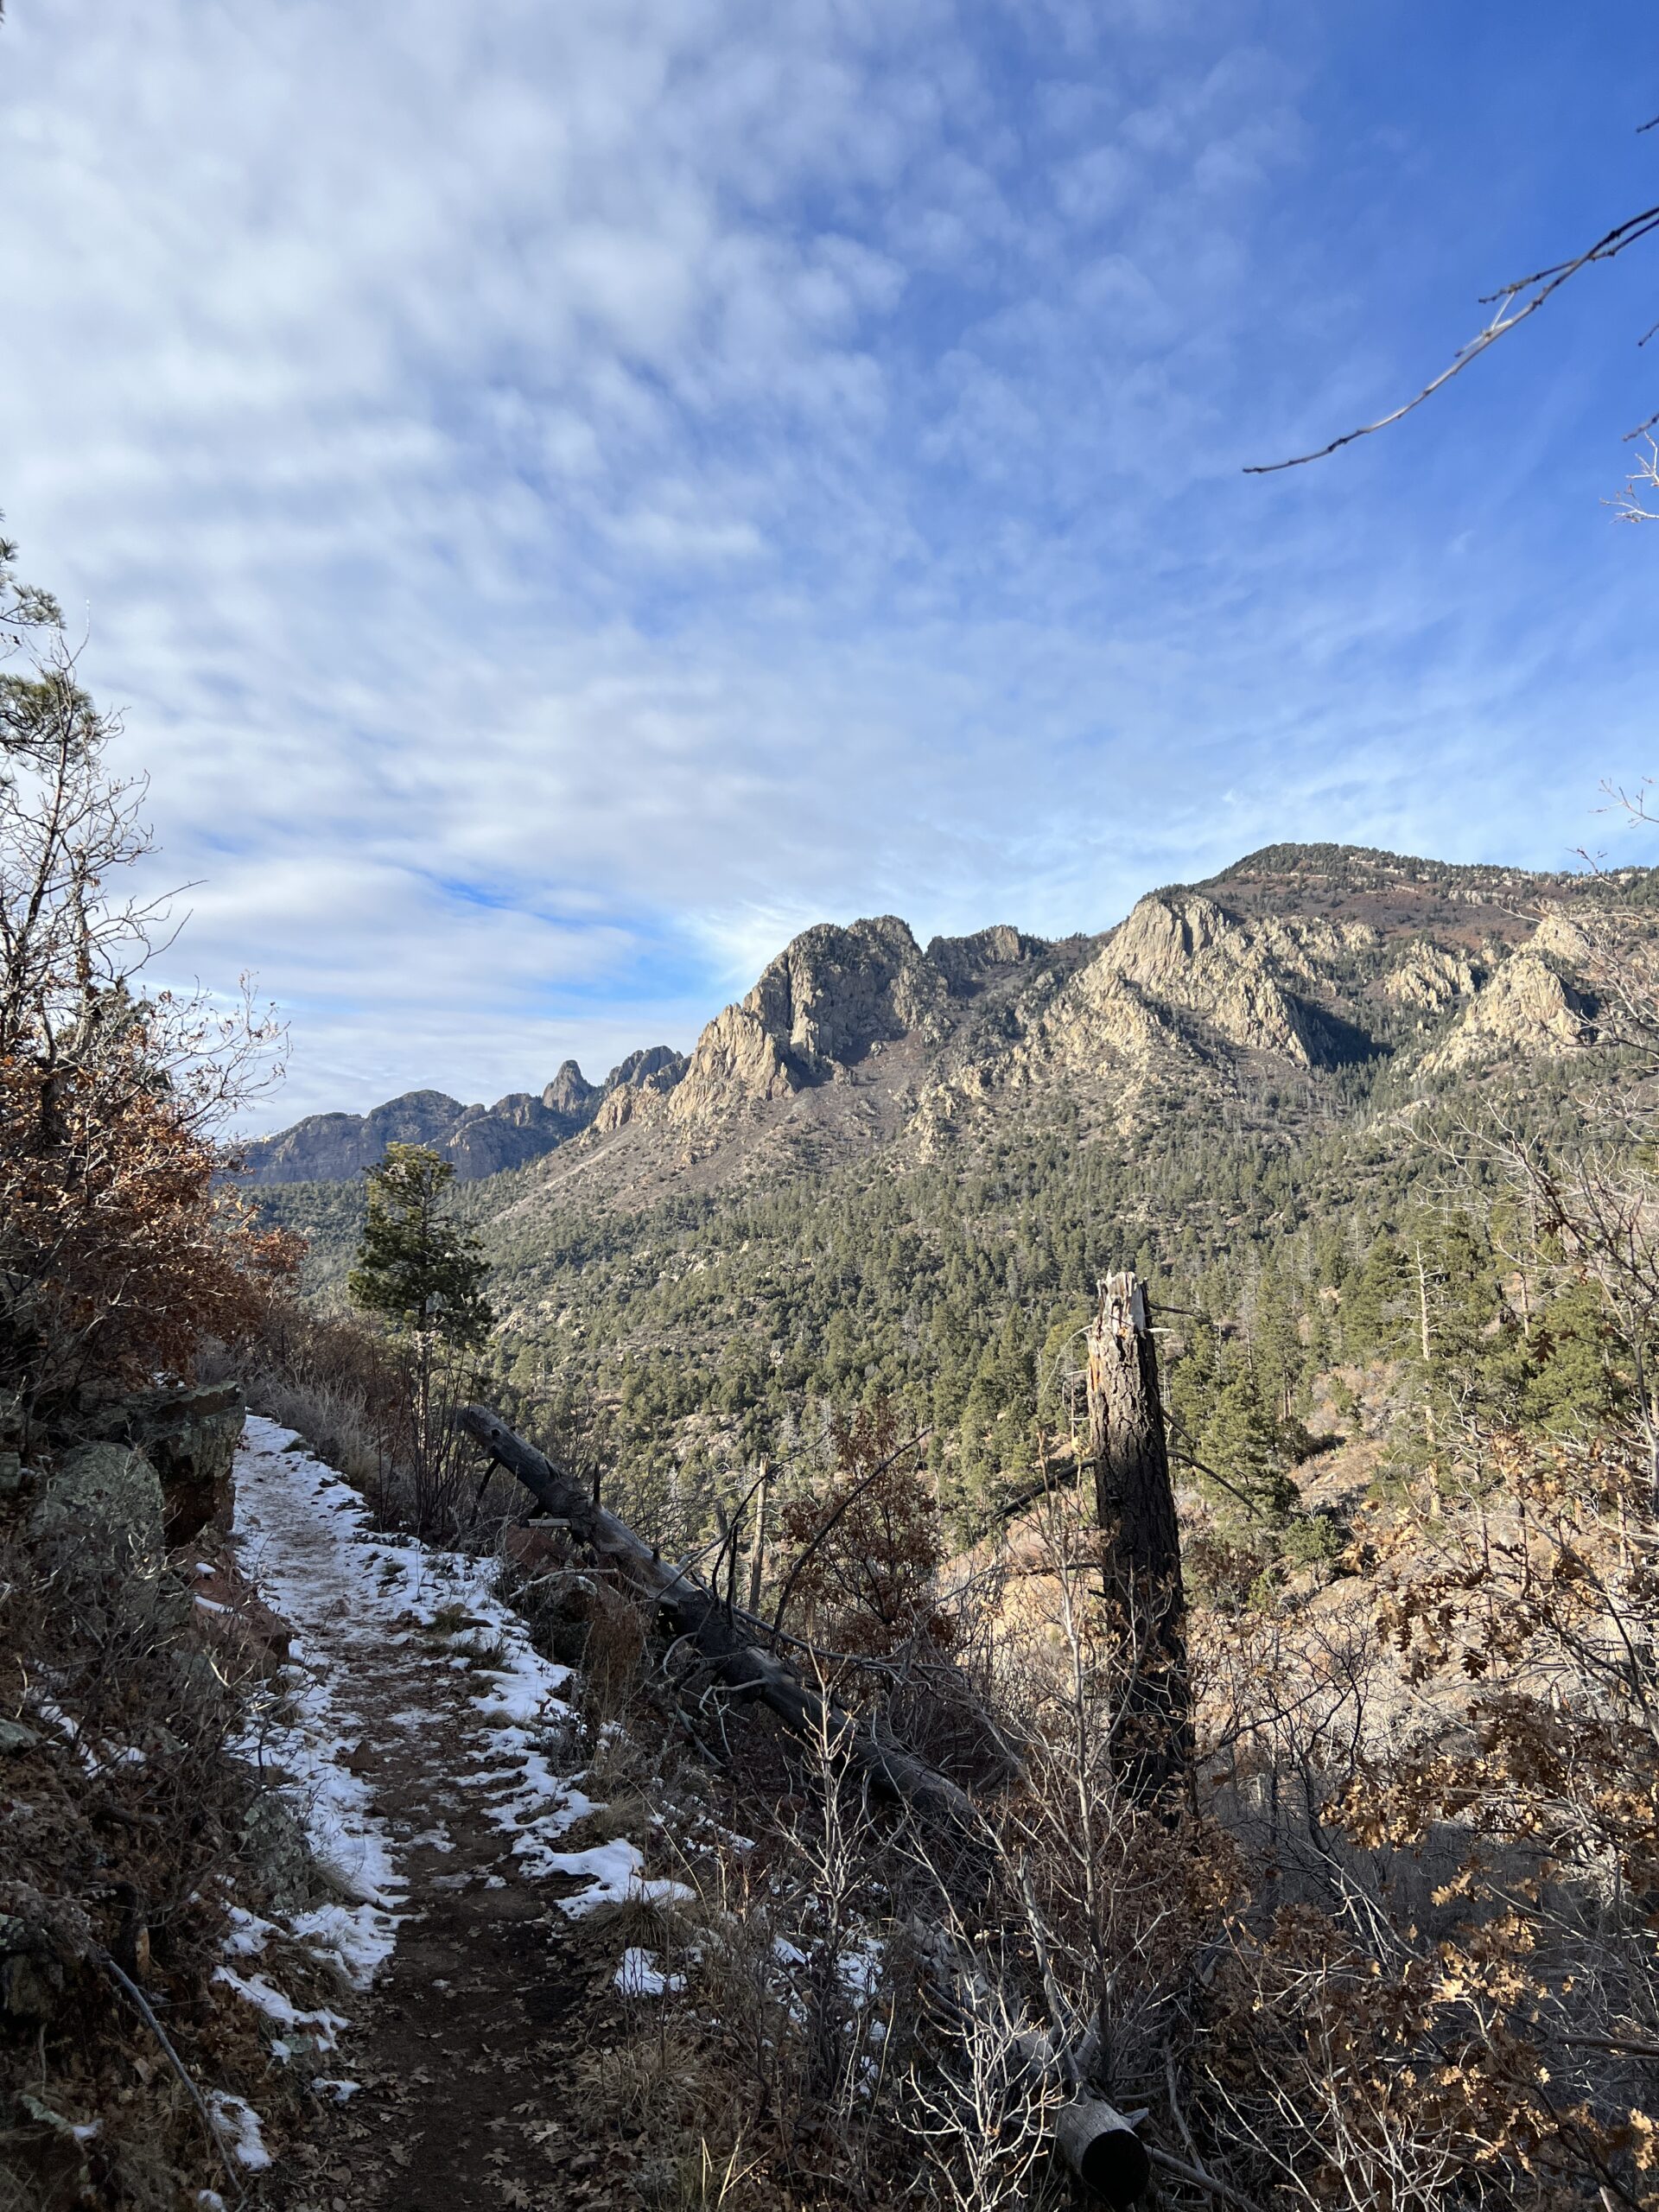 A Perfect Day on the Pino Trail